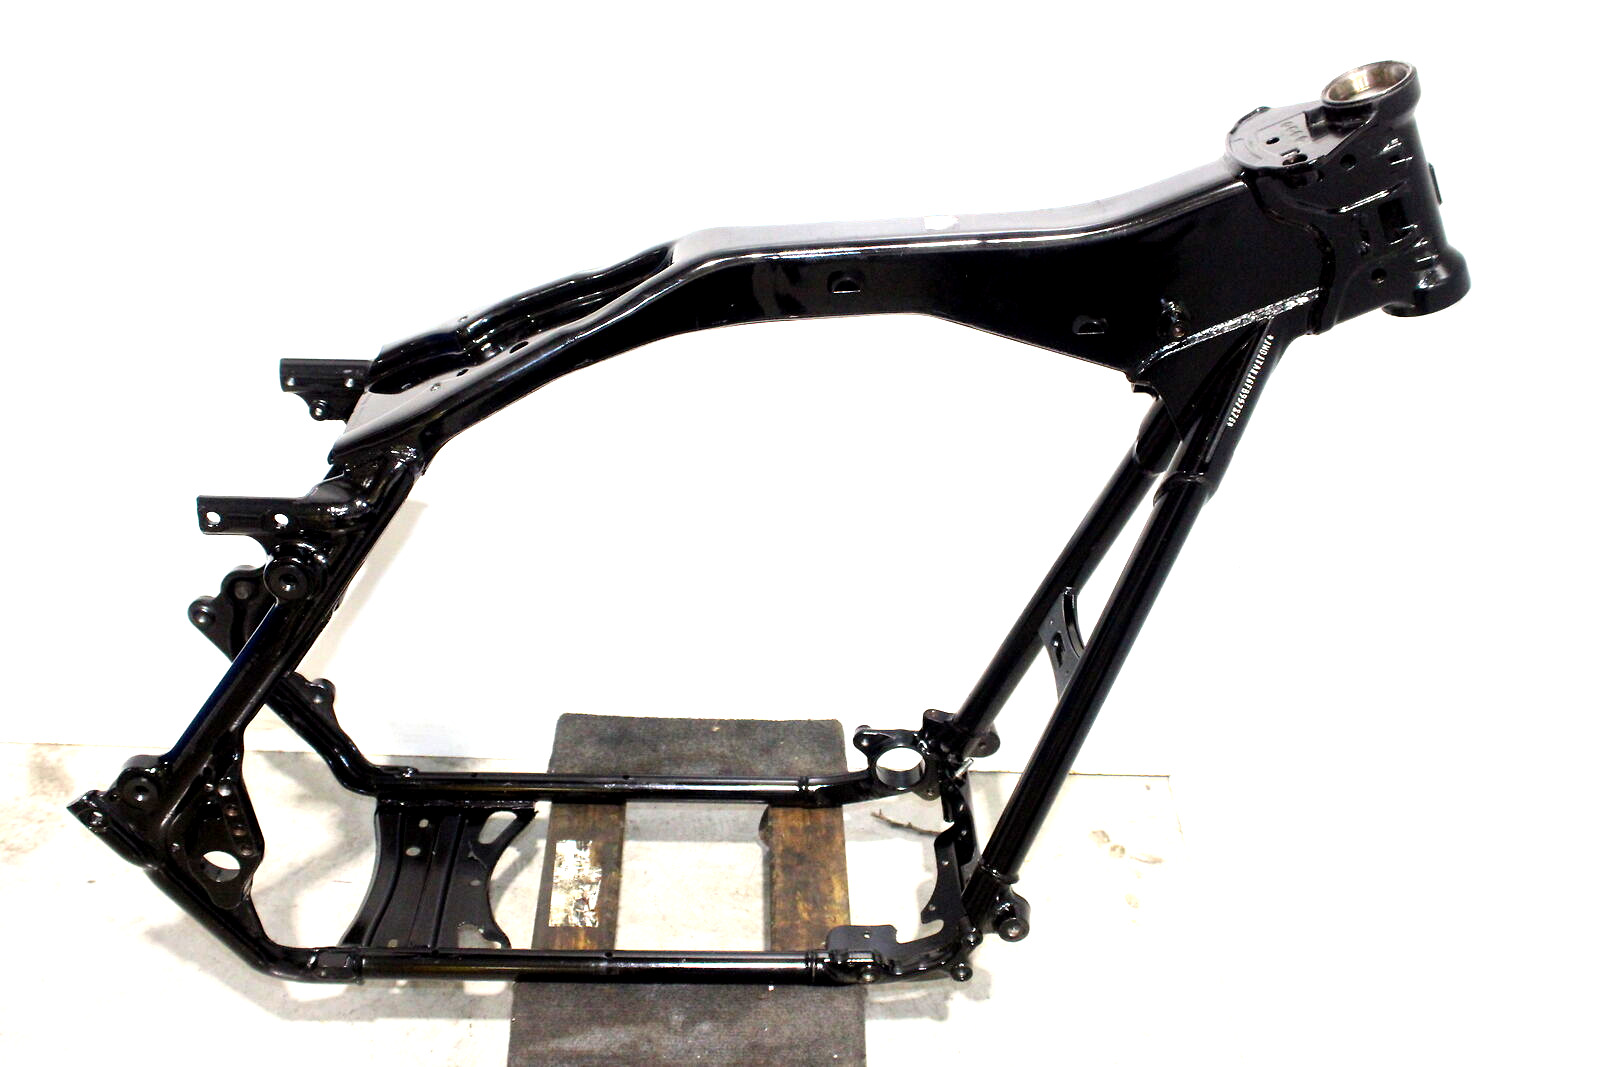 09-16 Harley Davidson Touring Electra Street Road Glide Frame Chassis AR*C